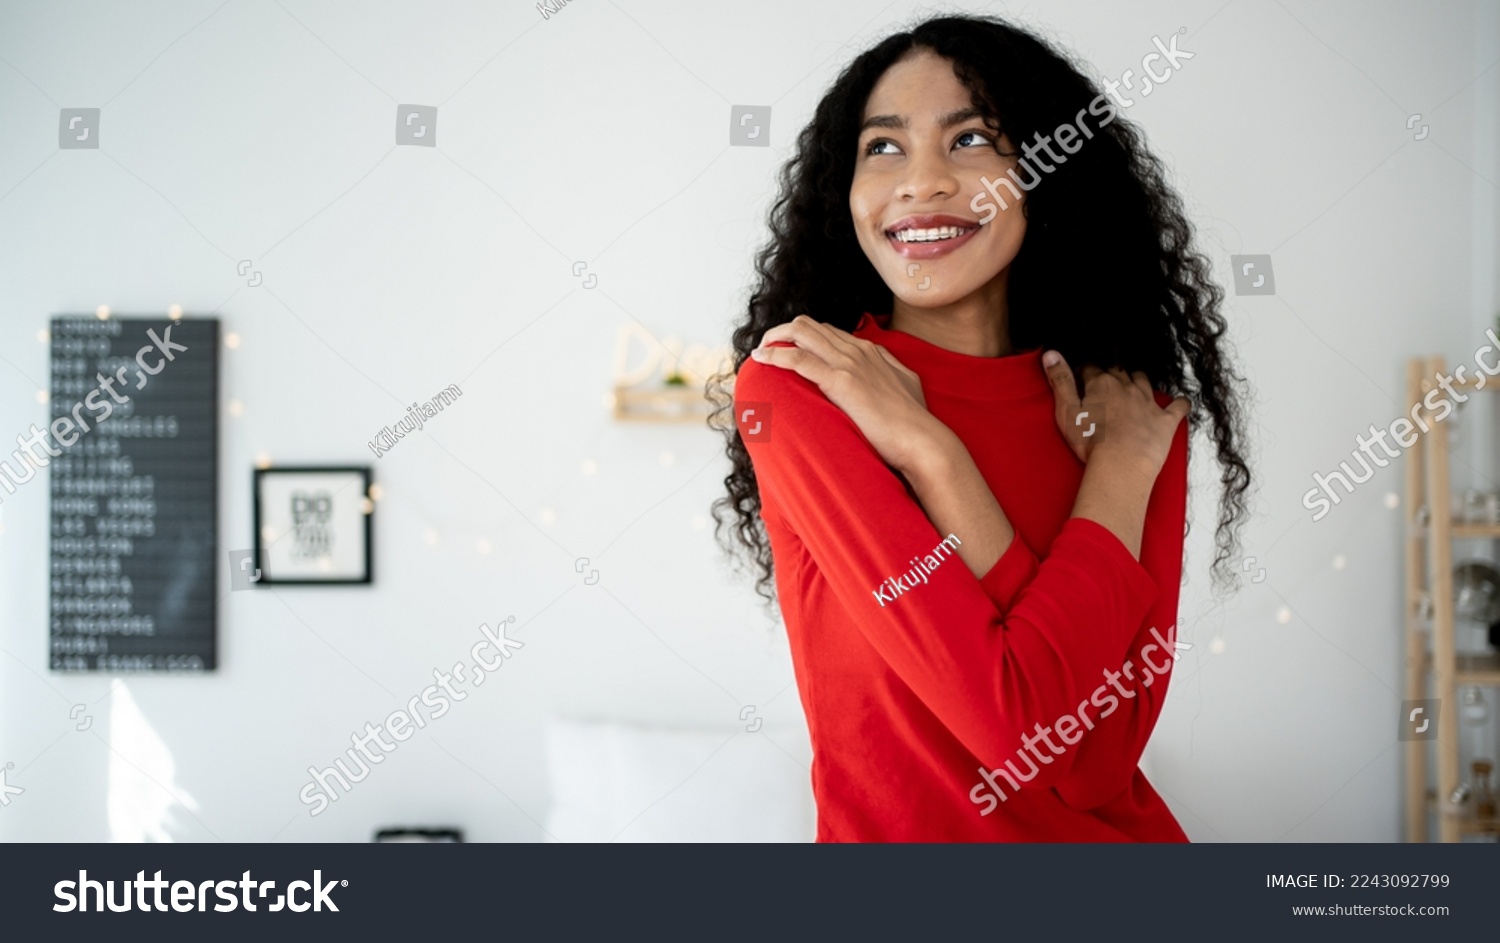 Embrace equity on multiracial Internal Women's Day. Lady African American good mood hands hug herself shoulders enjoy joyful red cloth laundry warmth toothy smile. #2243092799